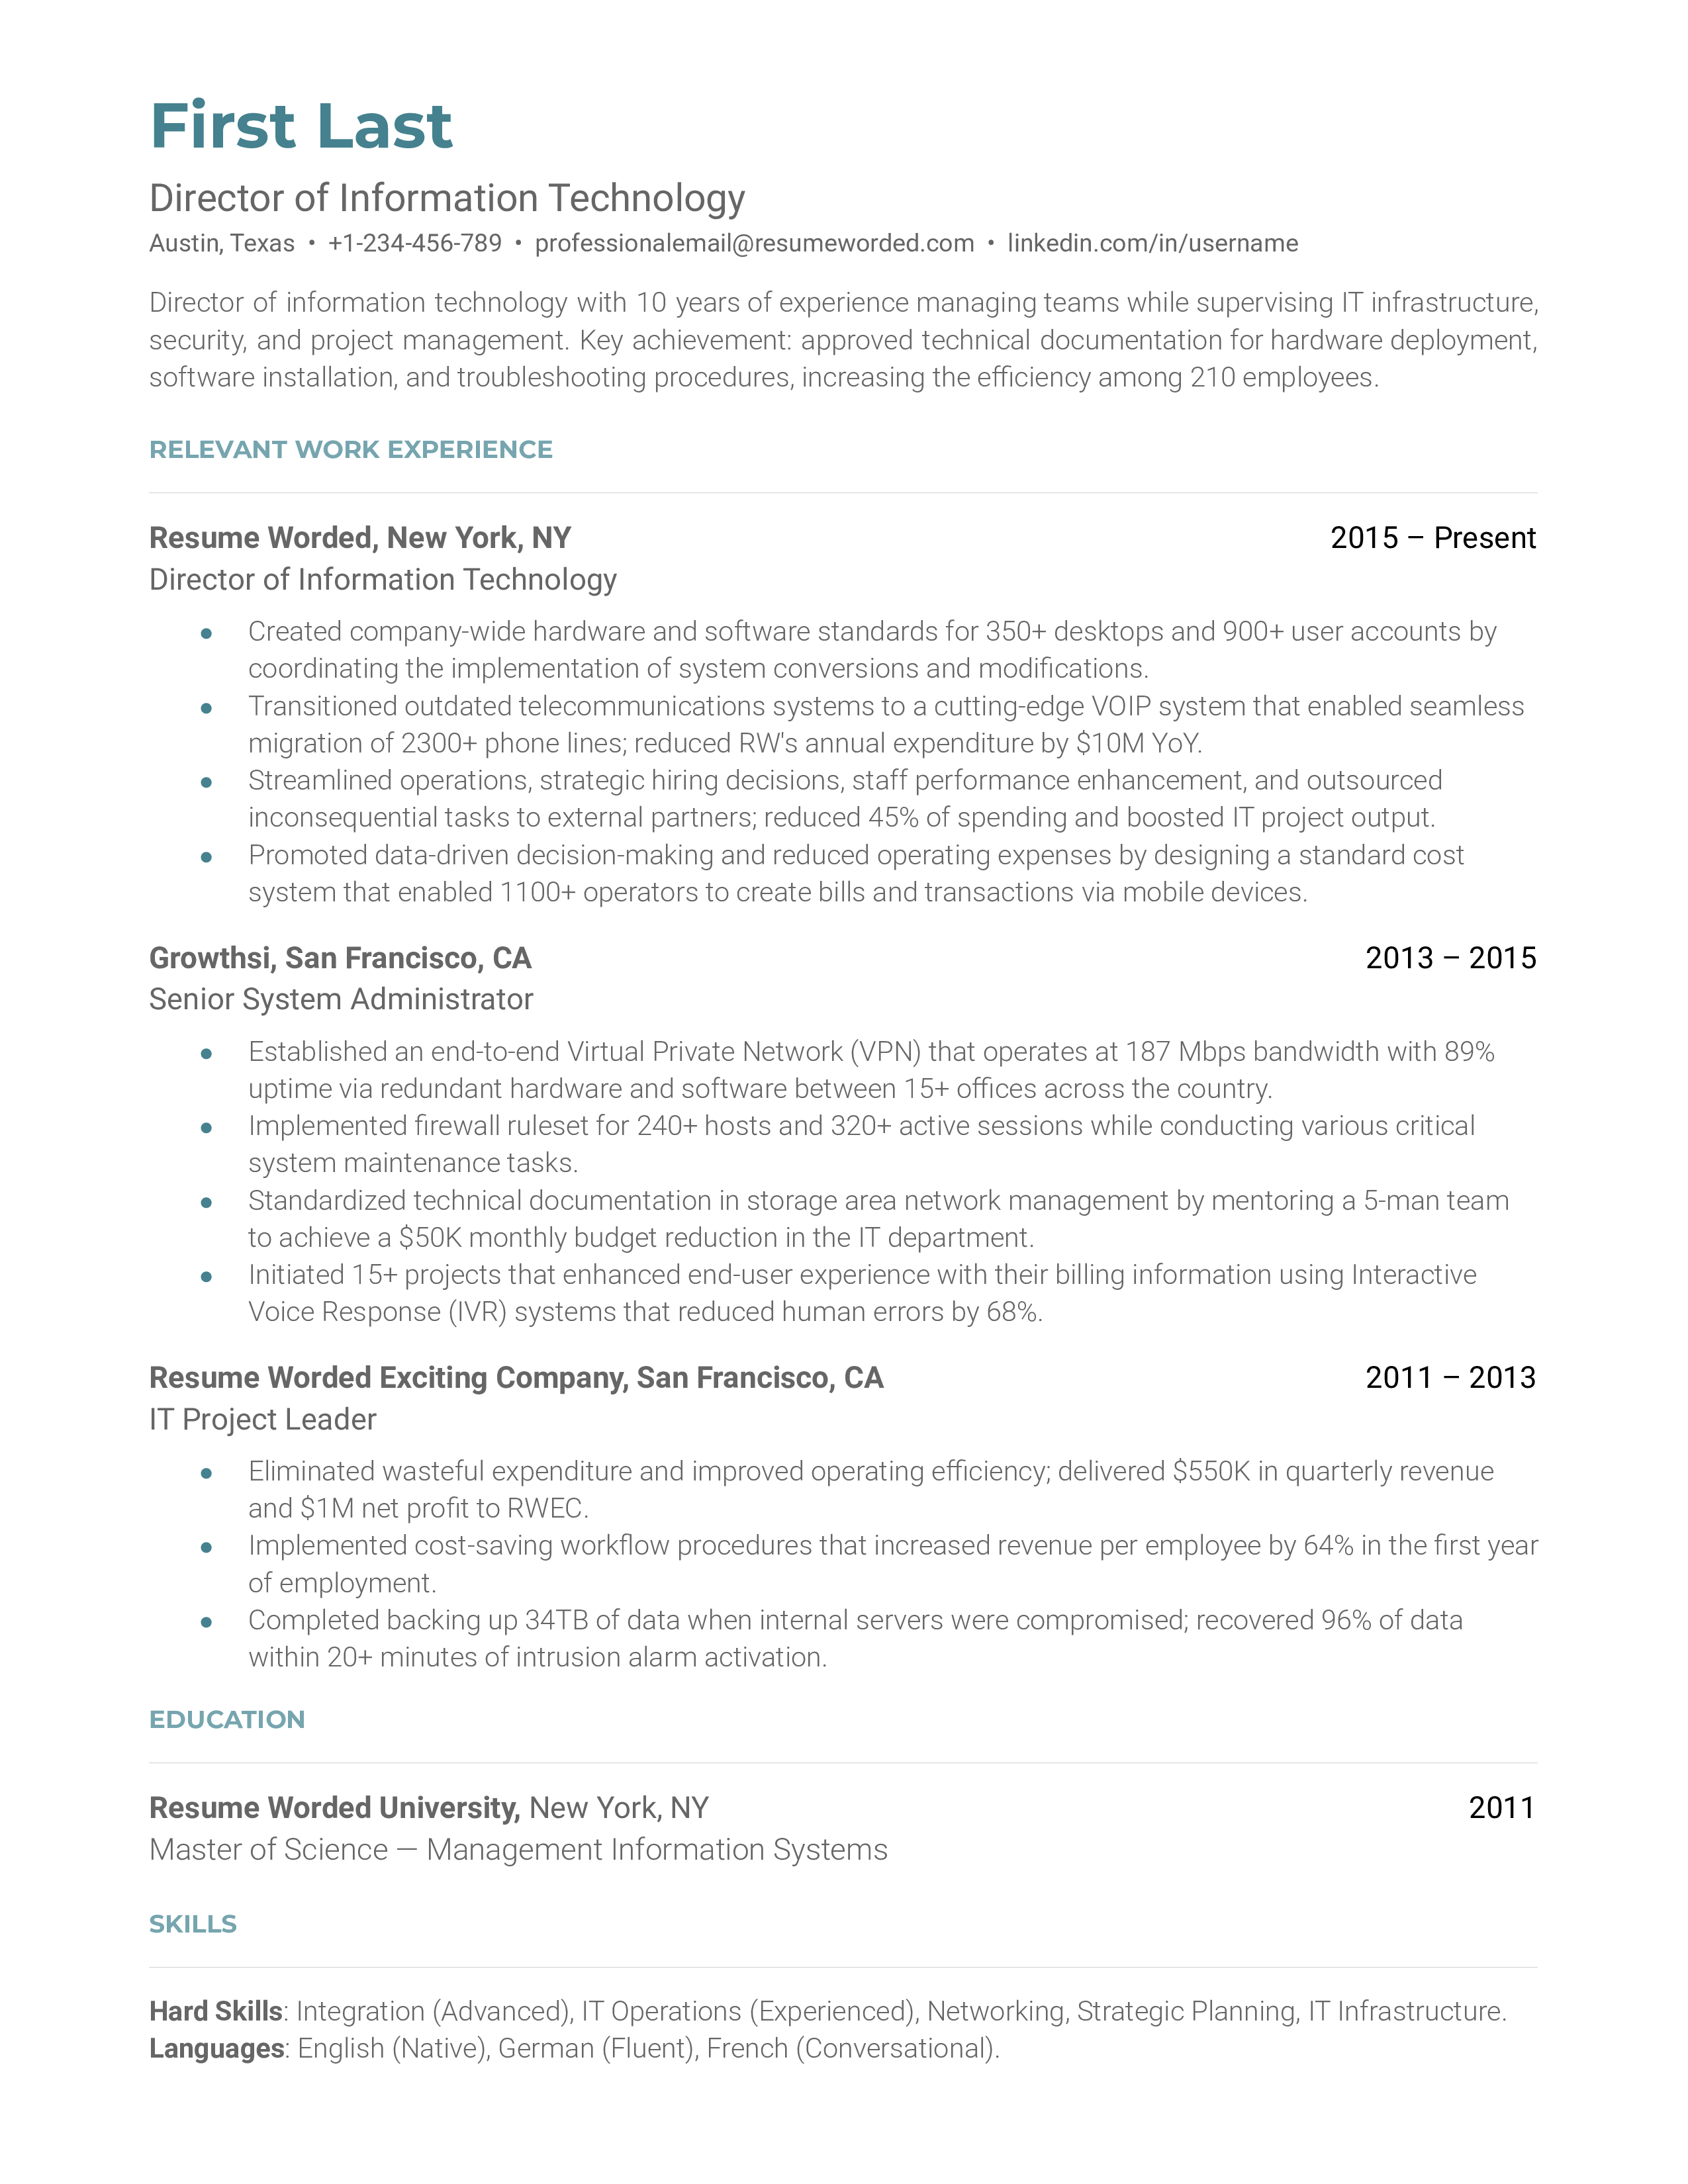 A director of information technology resume template prioritizing work experience.